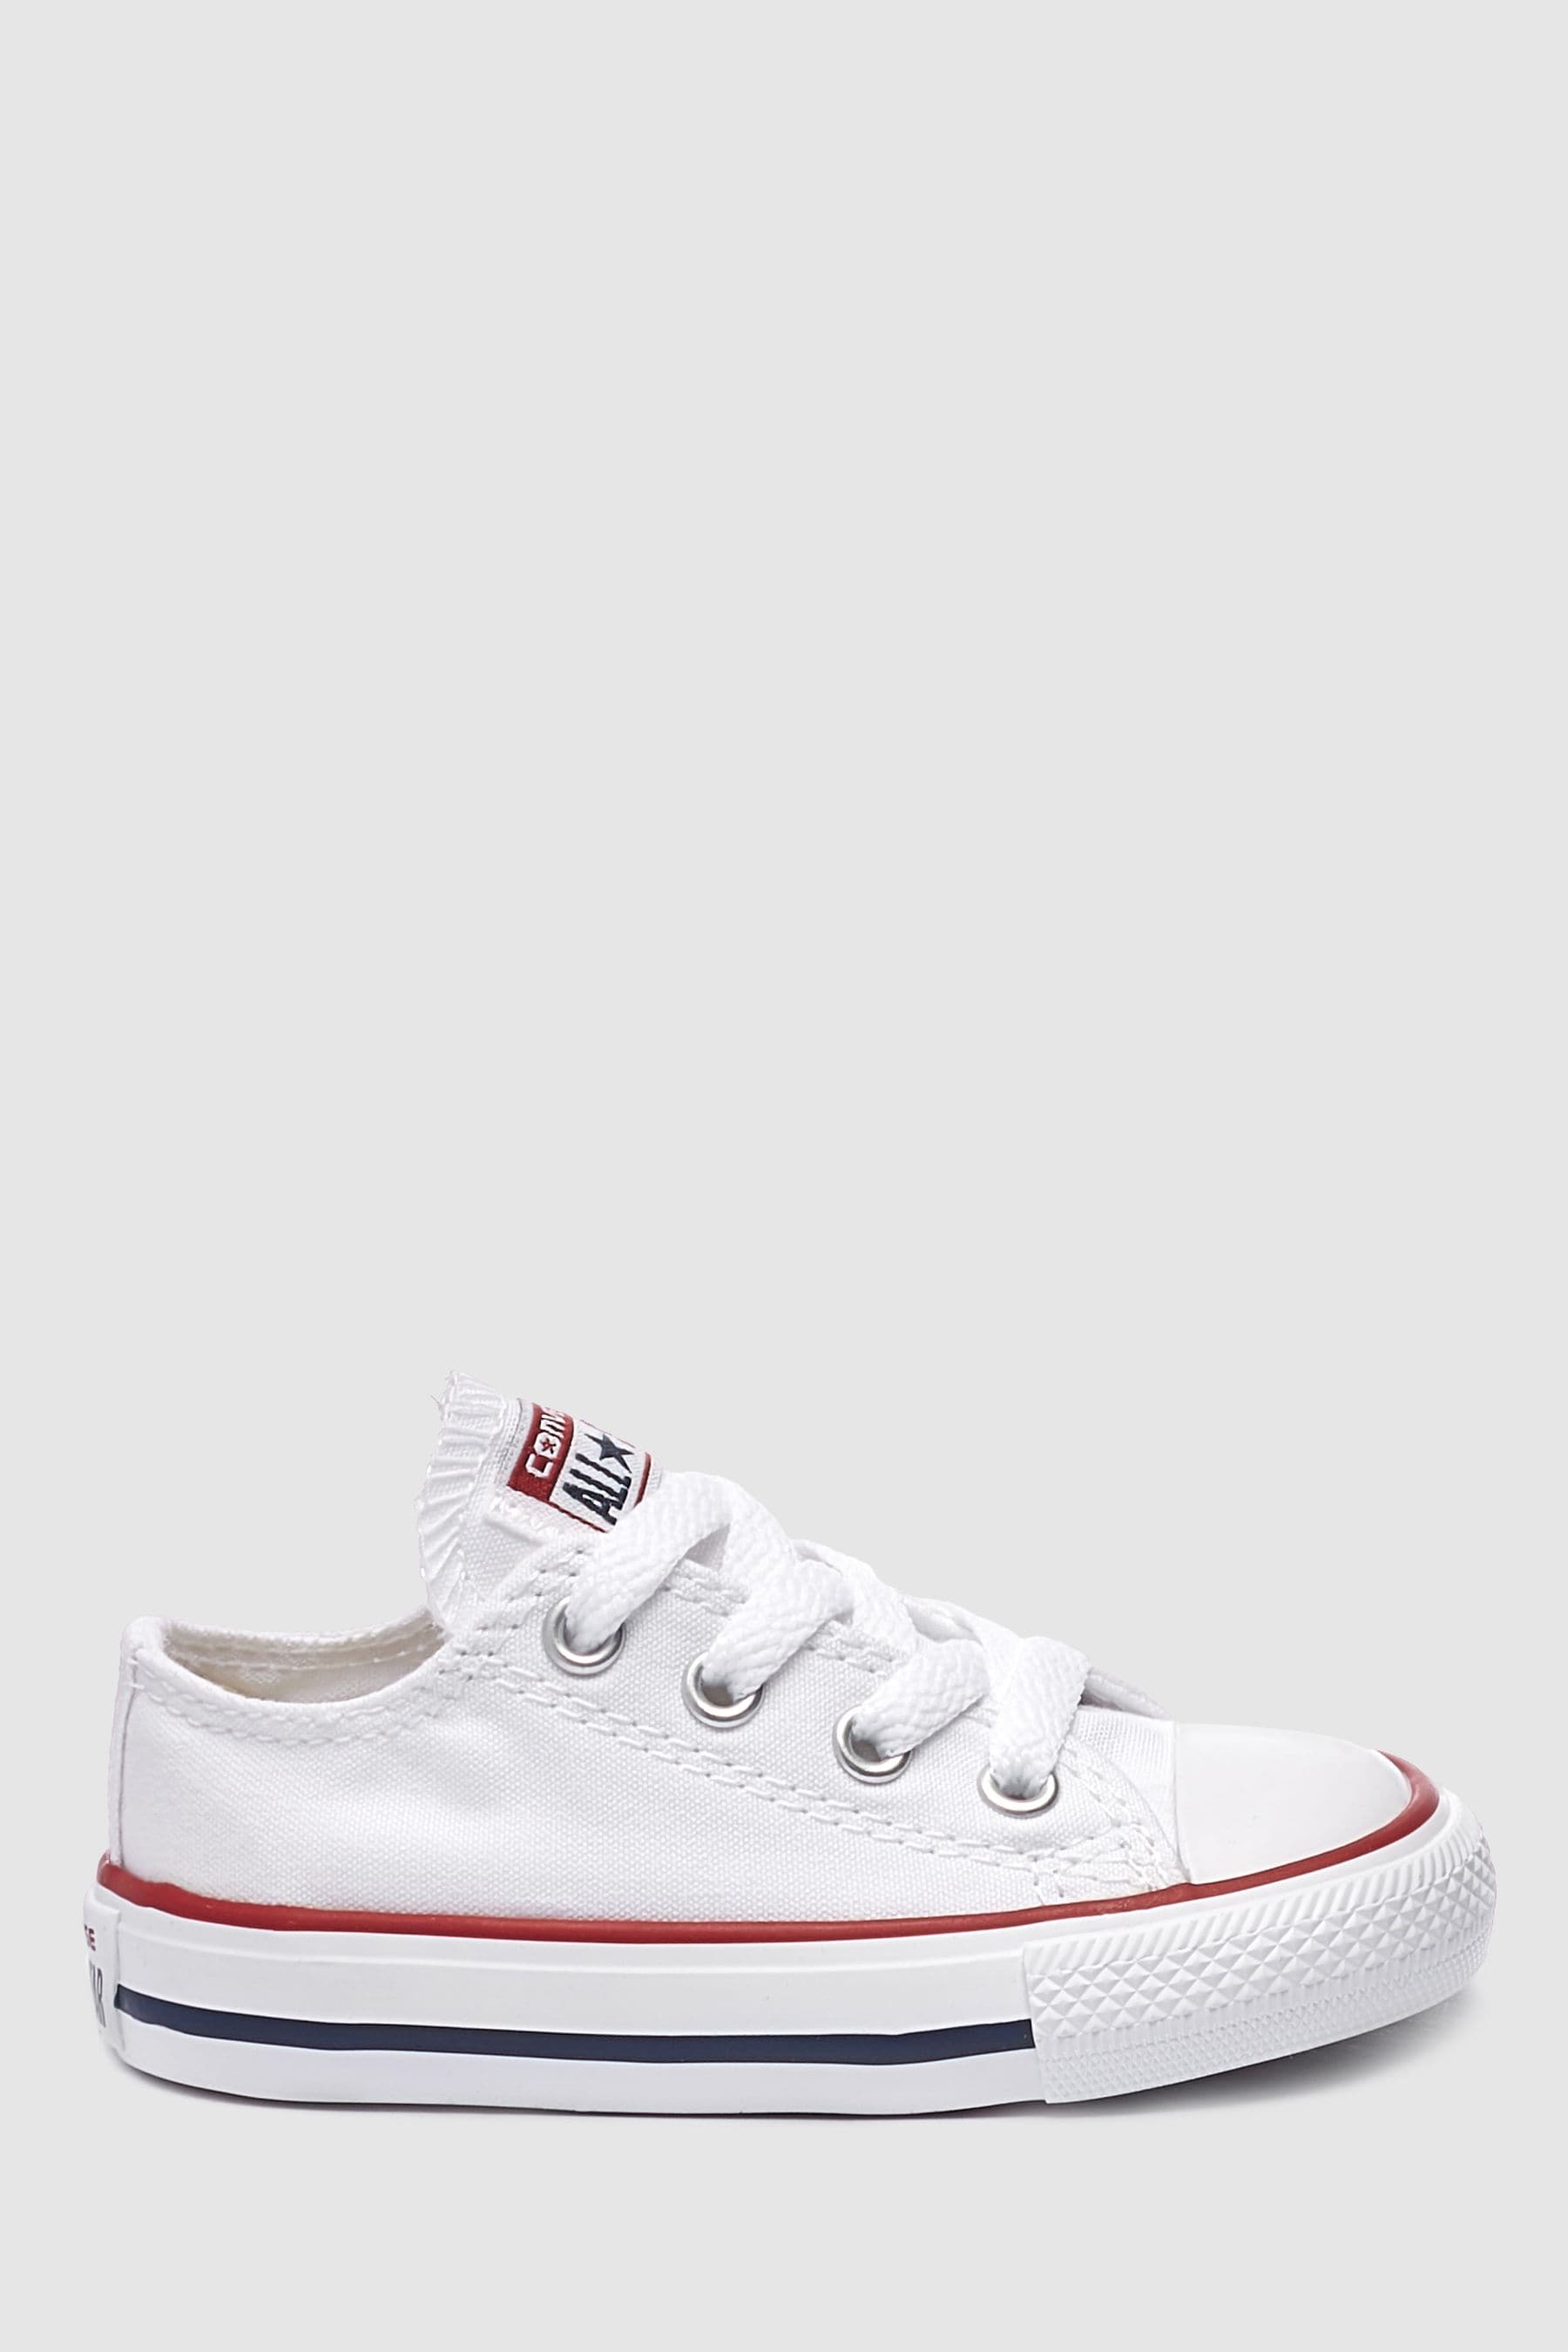 Buy Converse White Chuck Taylor All Star Infant Low Trainers from the ...